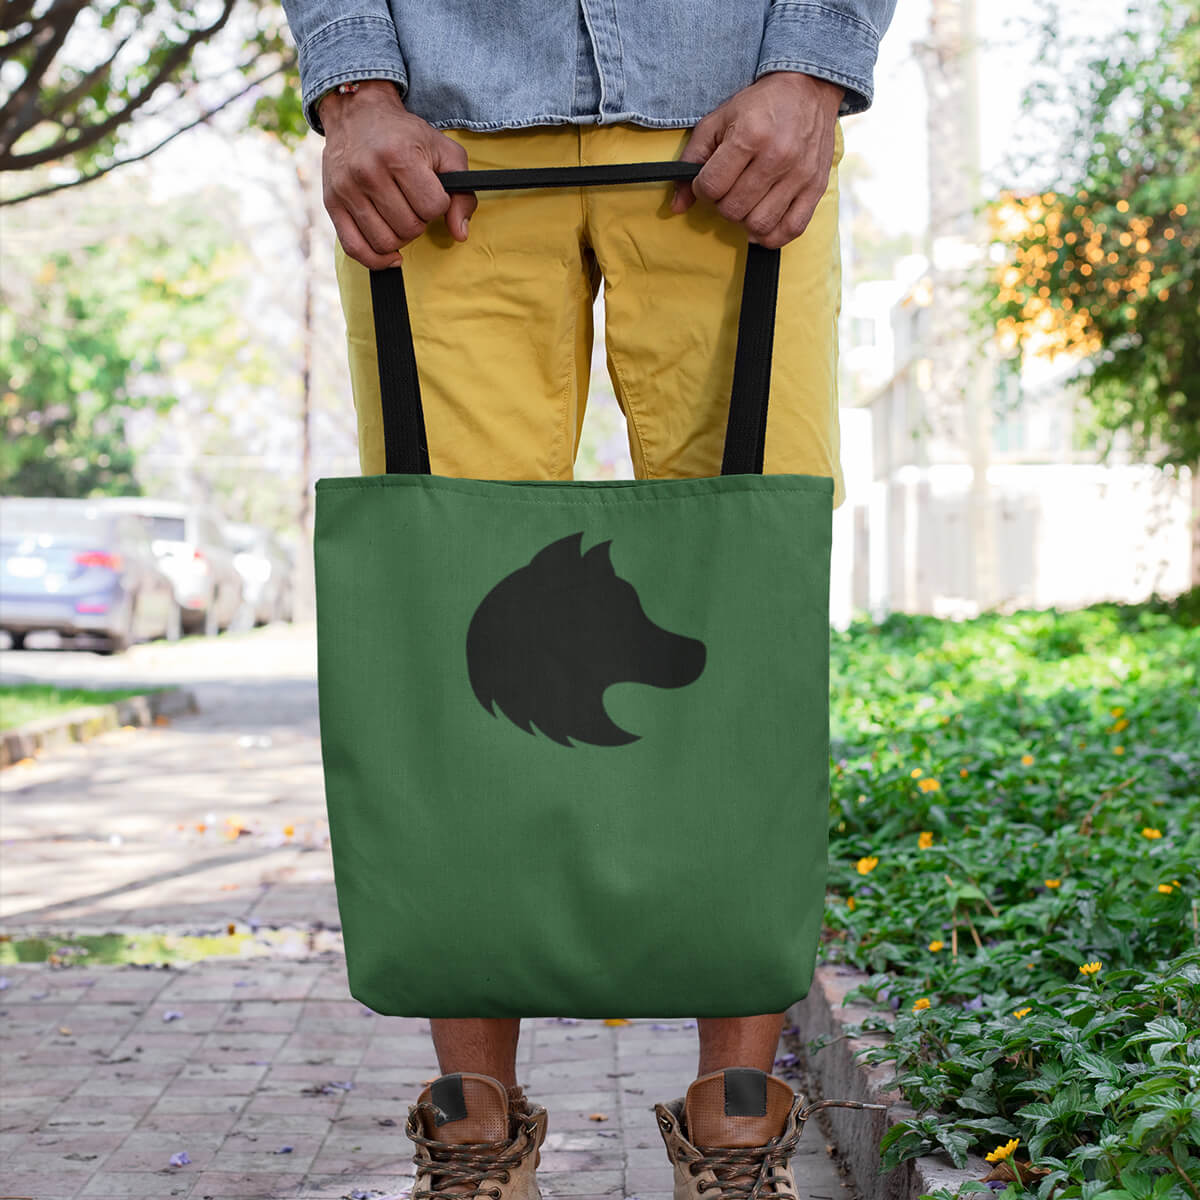 Green with black imprint custom promotional tote bags by curative printing